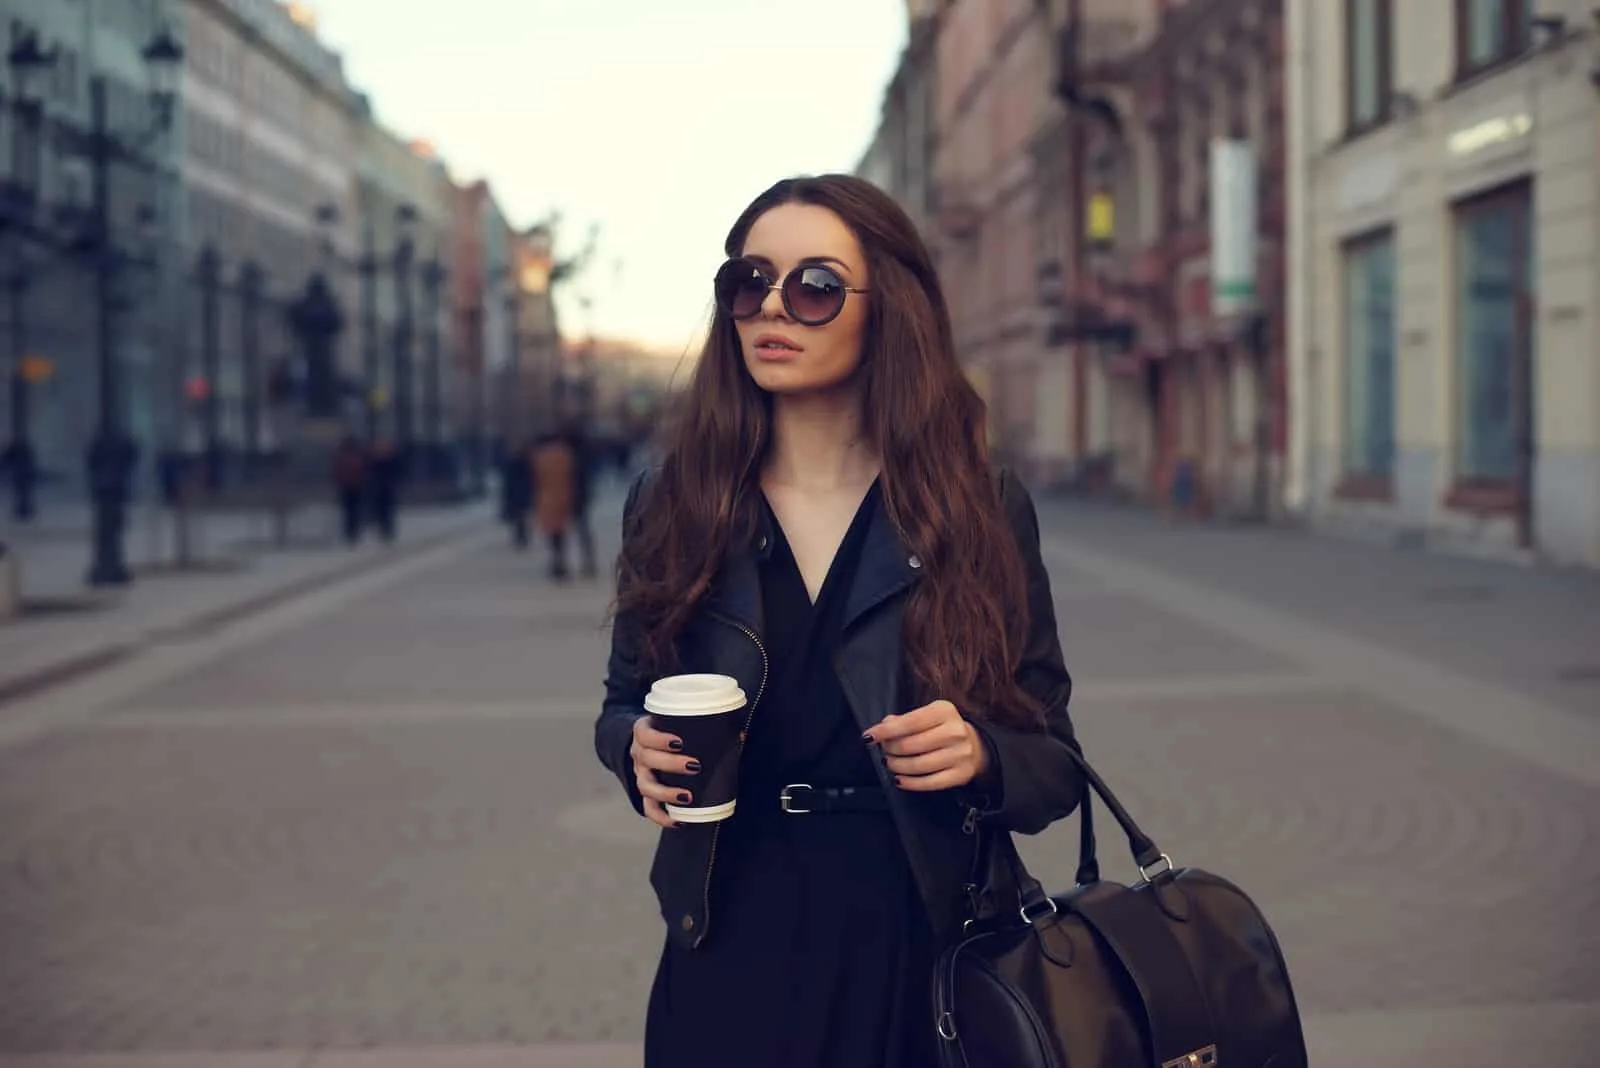 a woman with long brown hair walks down the street